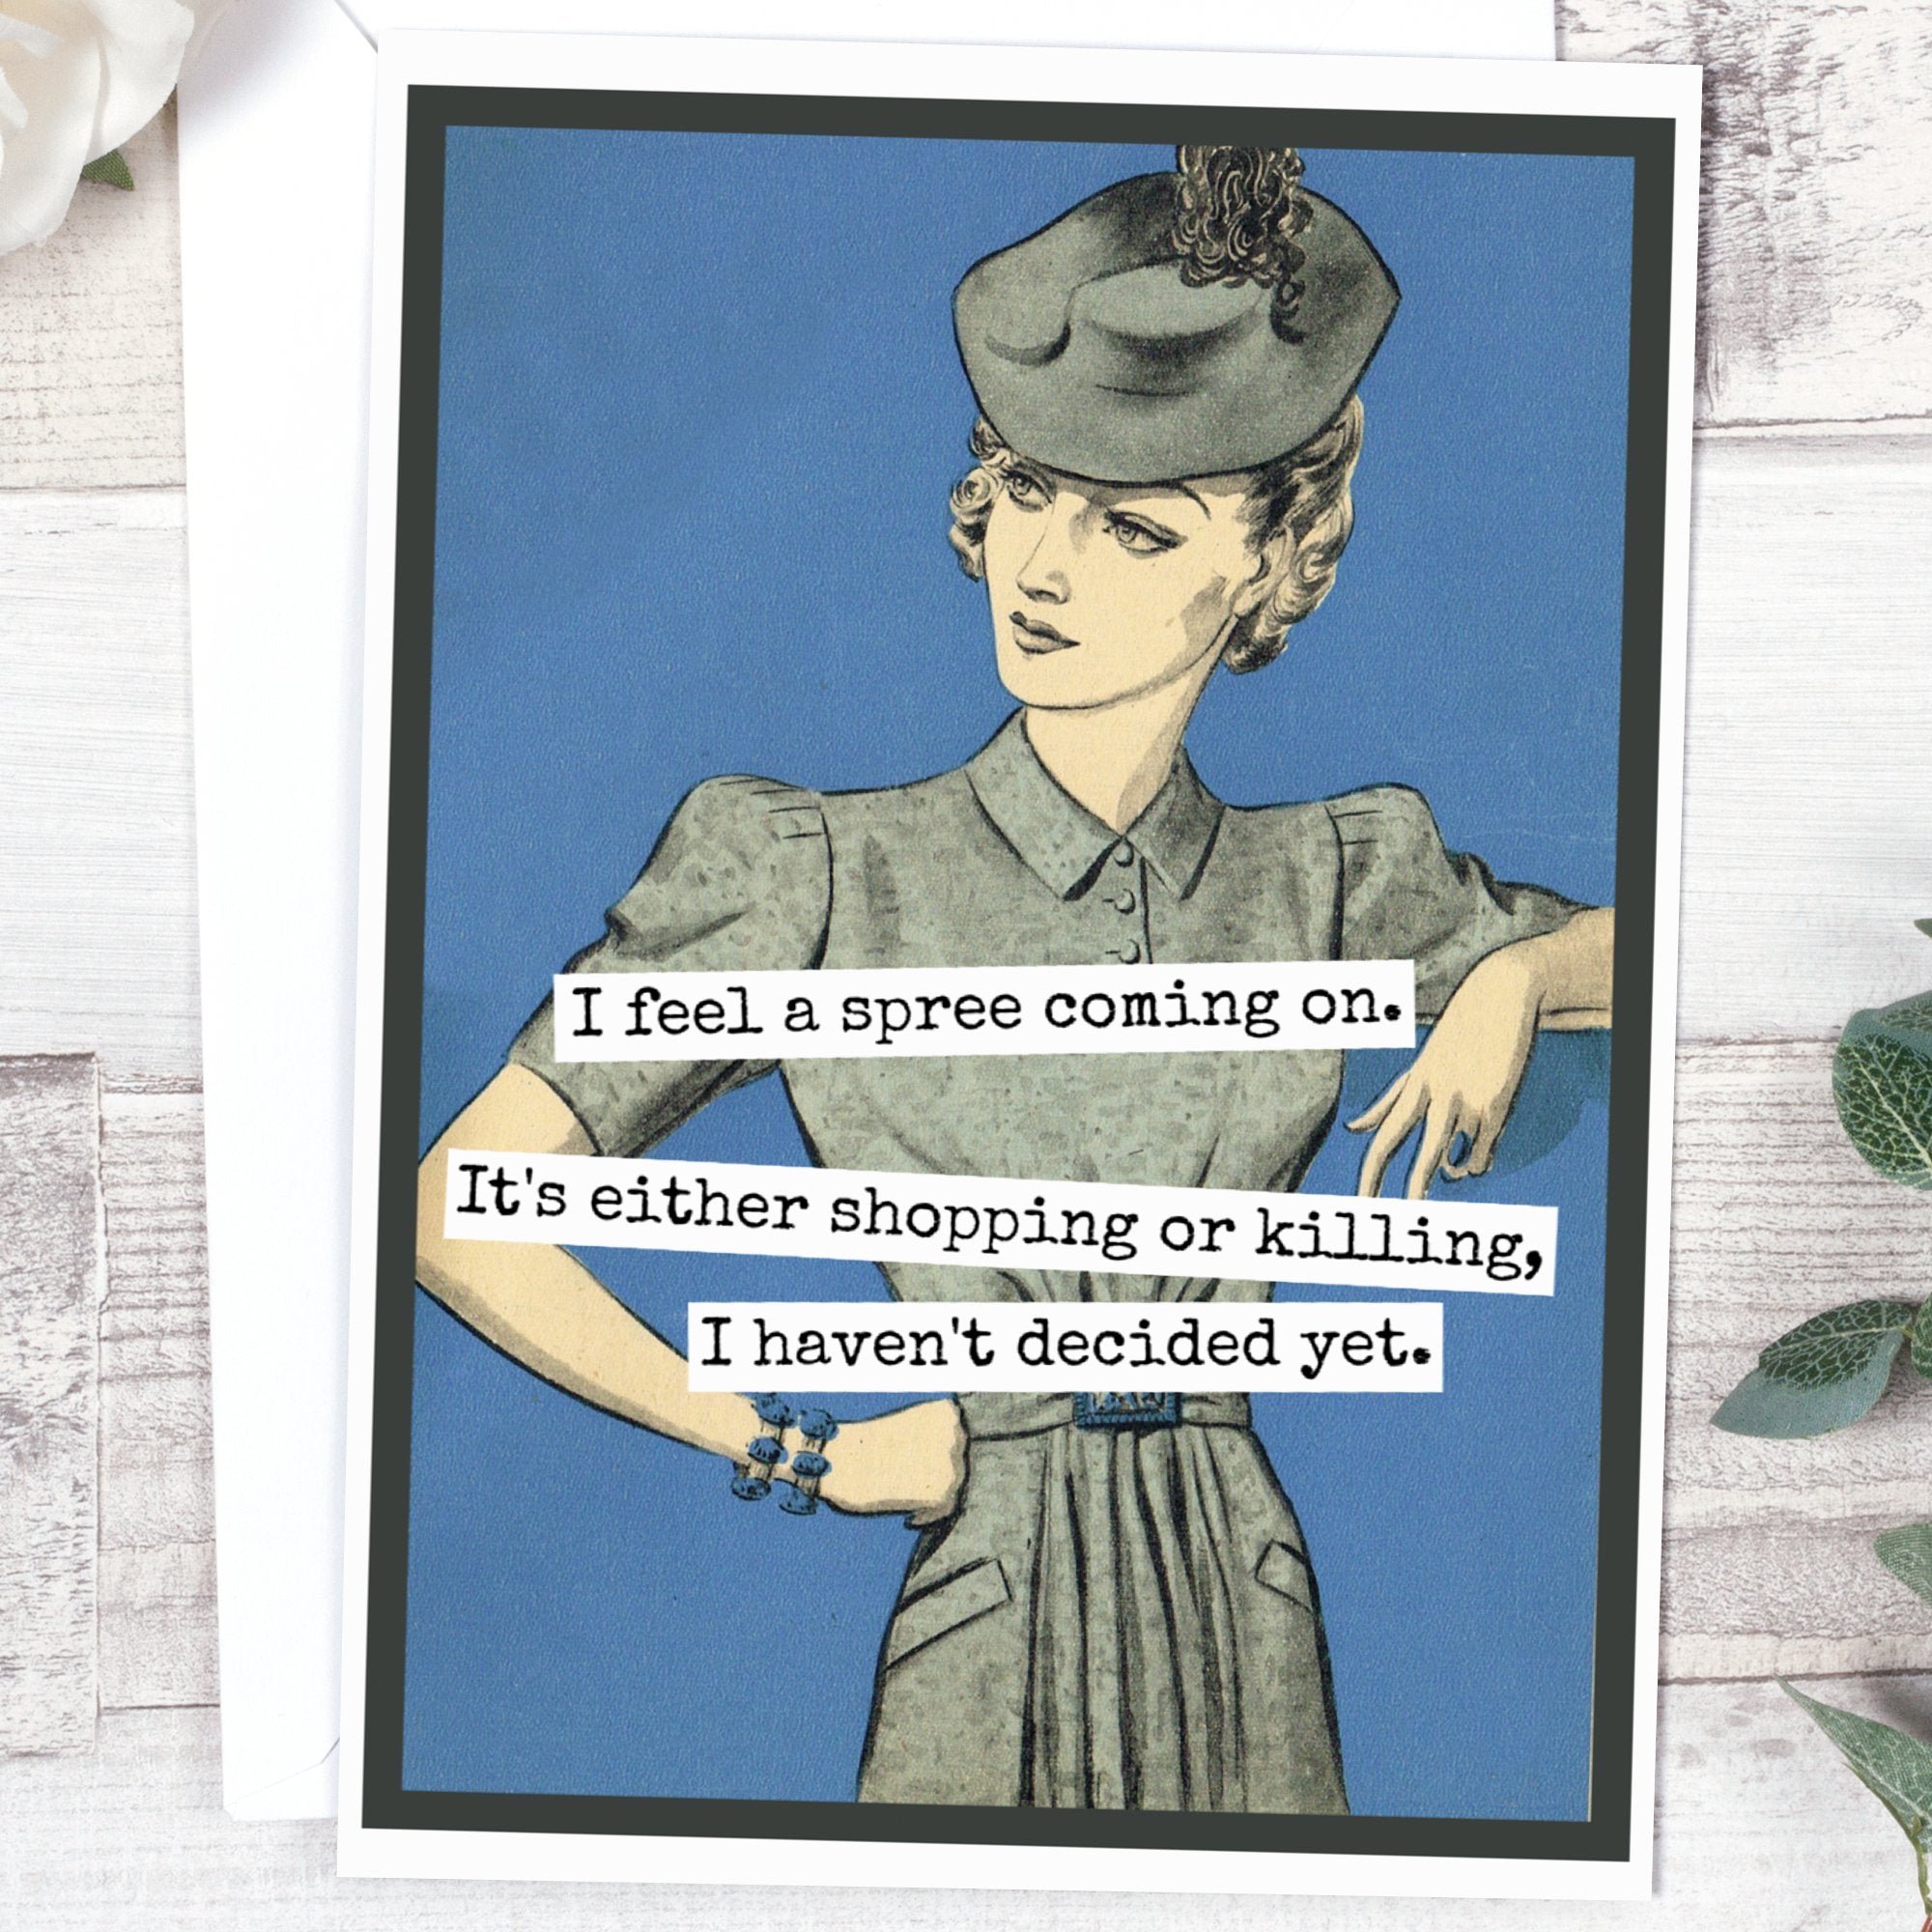 Card. I Feel A Spree Coming On. It's Either Shopping or... - My Filosophy